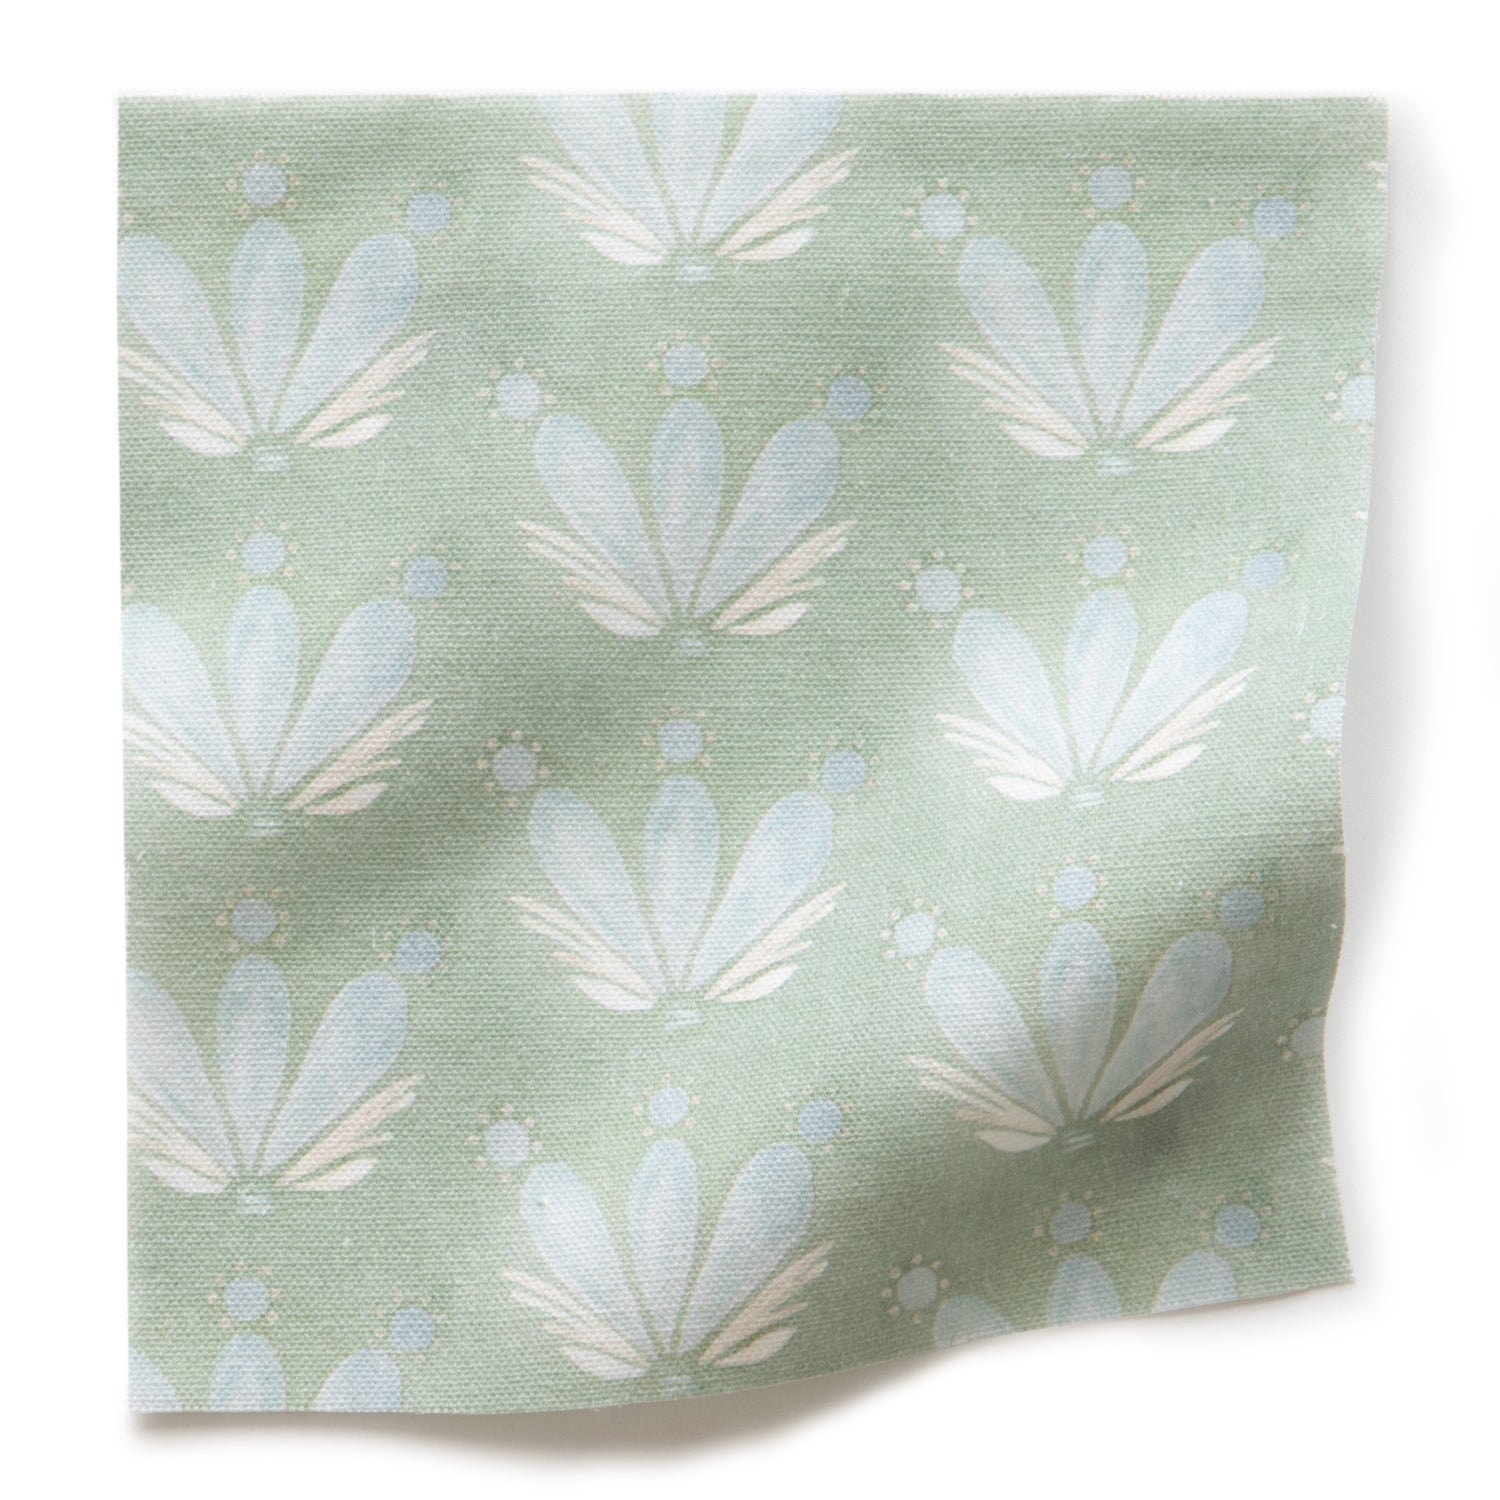 Blue & Green Floral Drop Repeat Printed Cotton Swatch